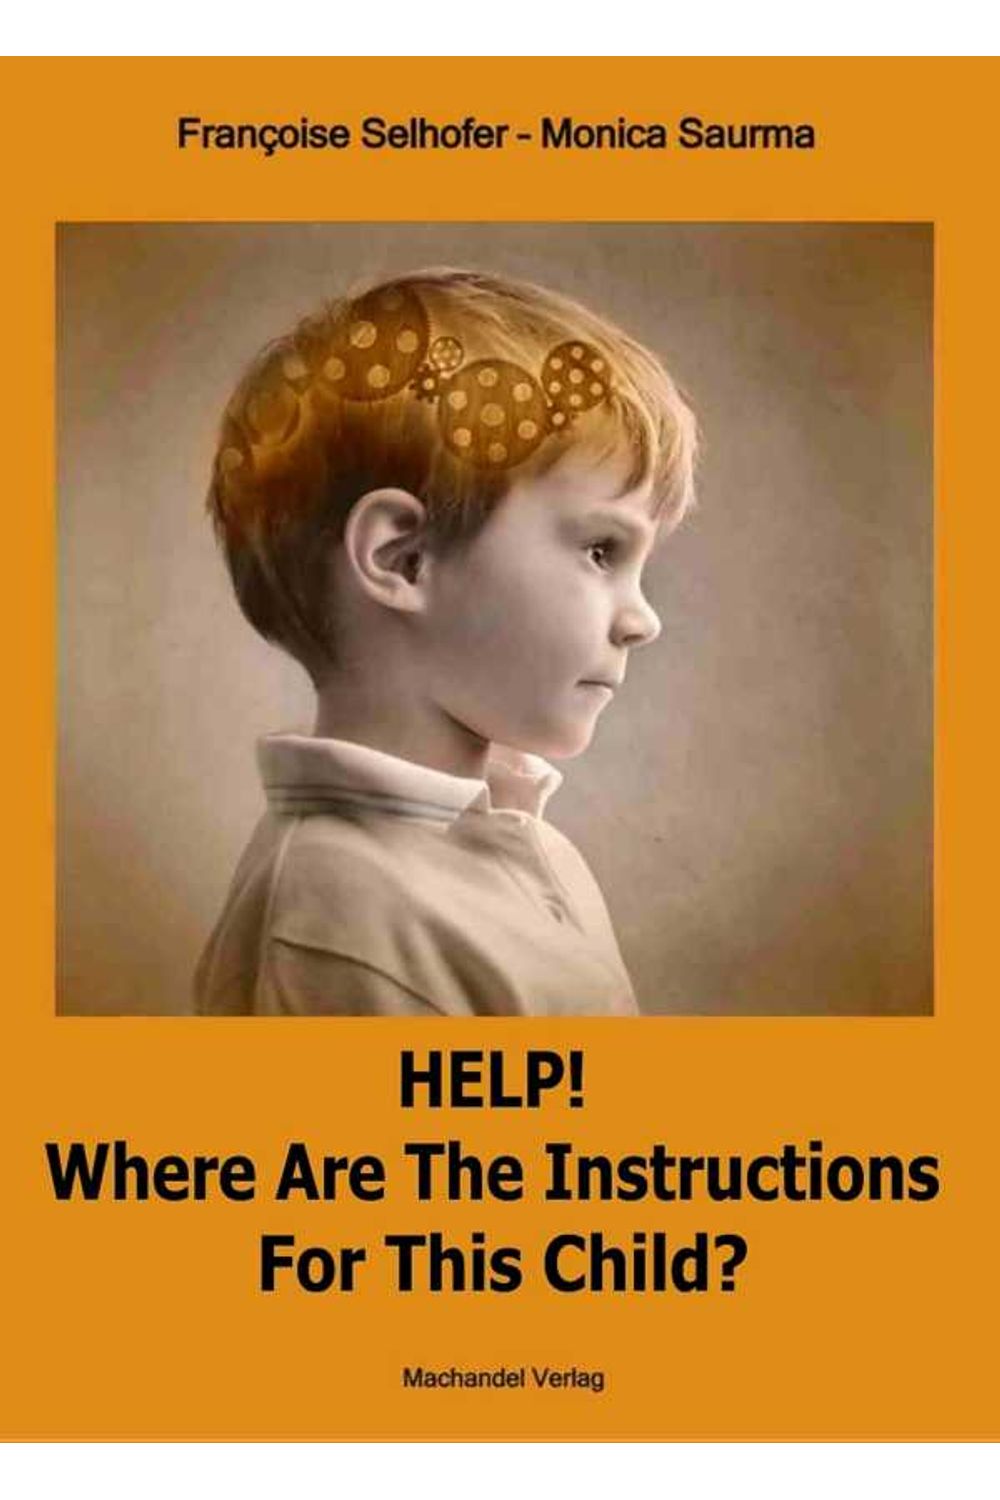 bw-help-where-are-the-instructions-for-this-child-machandel-verlag-9783939727873